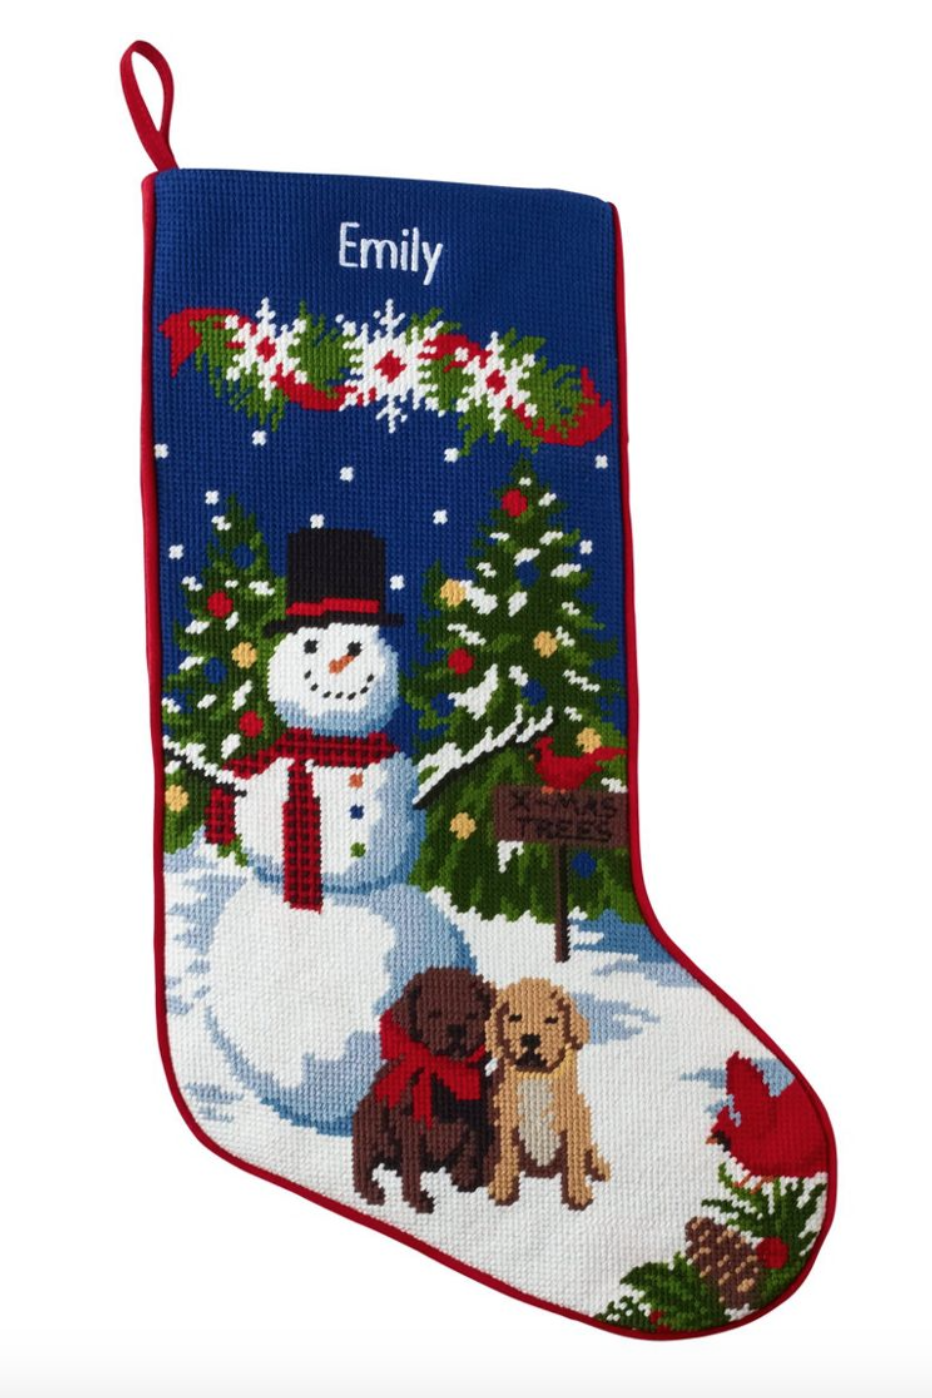 Puppies and Snowman Needlepoint Christmas Stocking